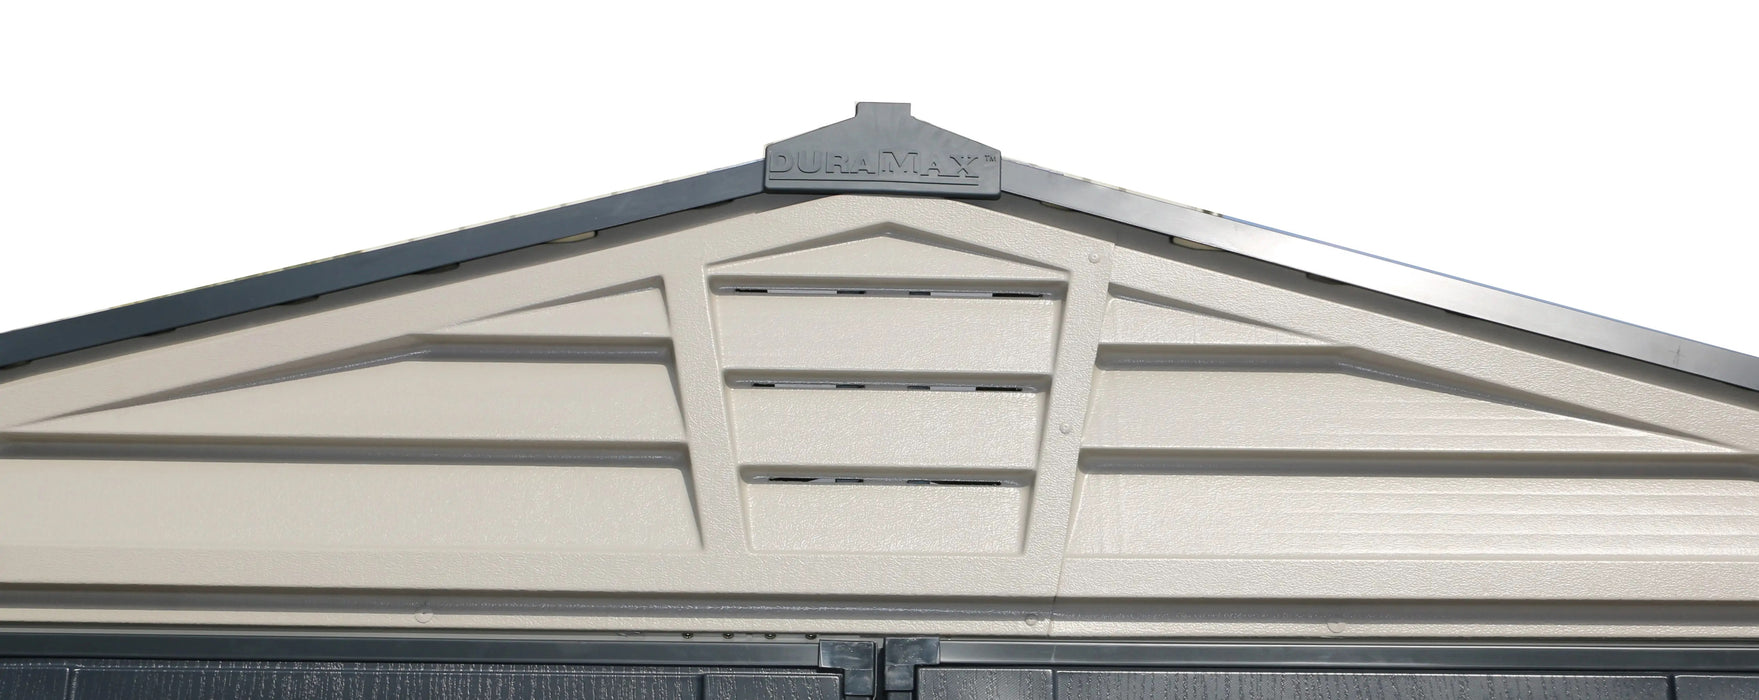 An image of the Duramax StoreMax Plus 10.5 X 8 - 30225 shed from the brand Duramax. roof details close up